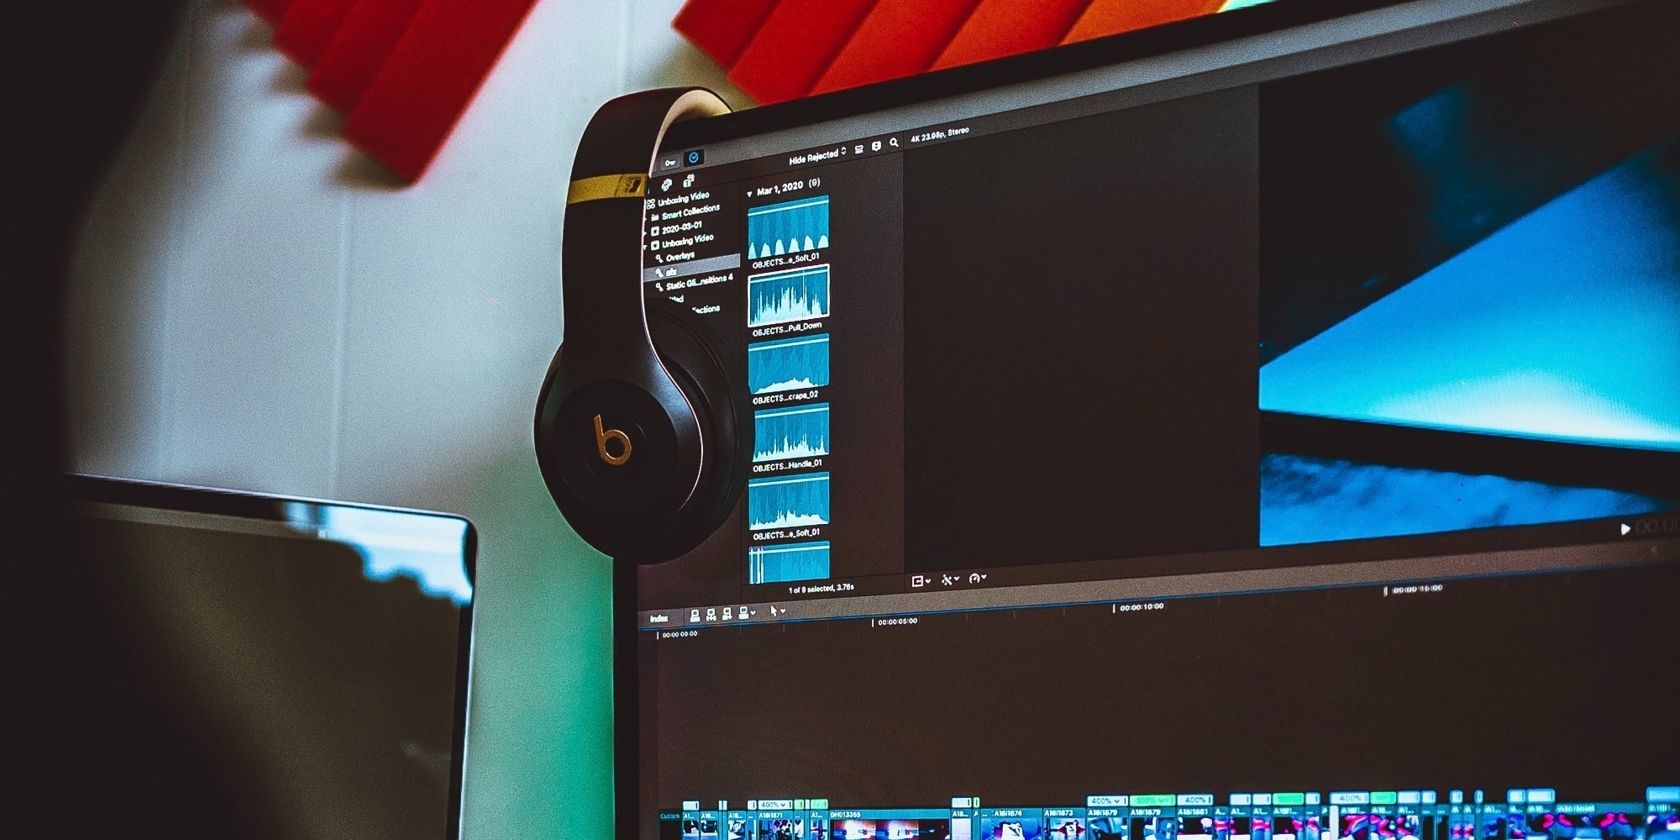 A monitor with some headphones.